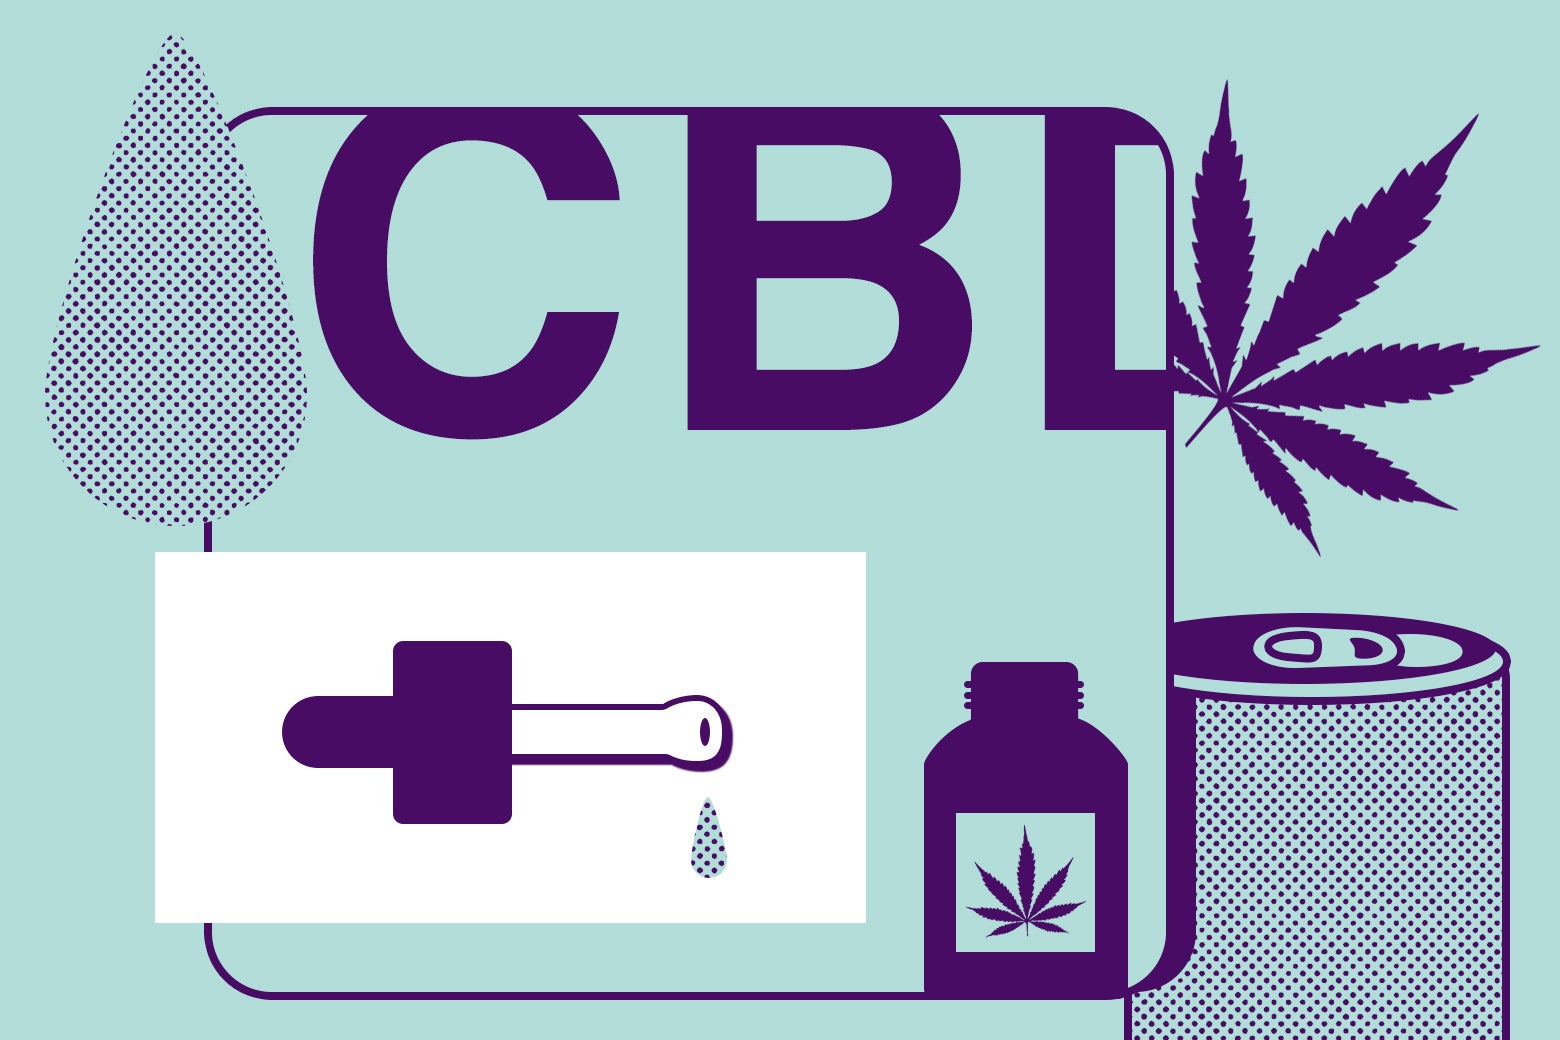 The letters CBD surrounded by a liquid dropper and fluid drops, a bottle with a pot leaf on it, a pop-top can, and a pot leaf floating on its own